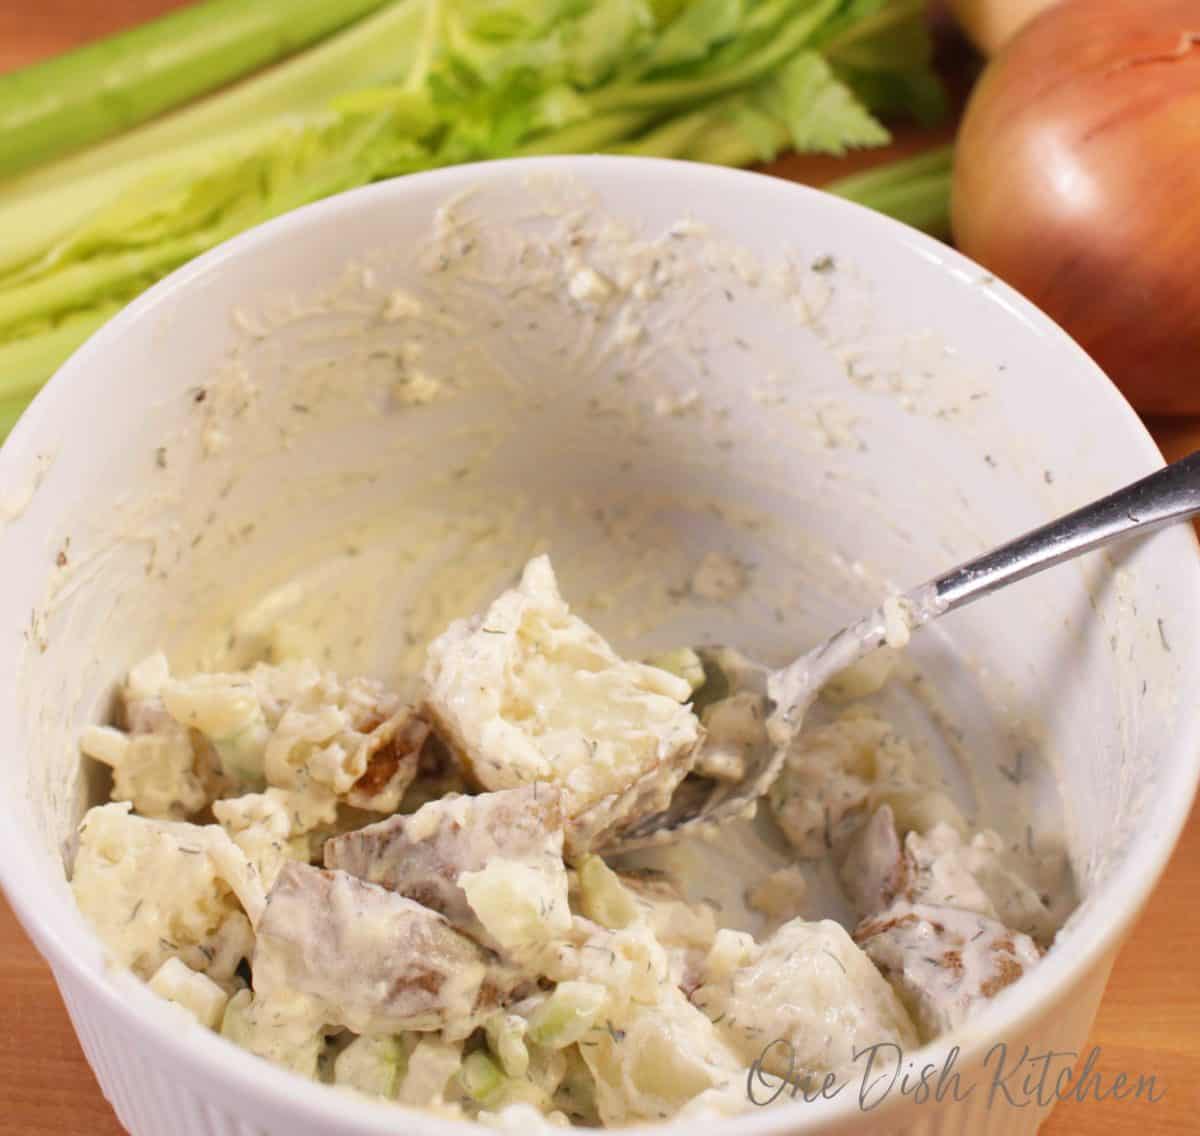 Mixing onions, celery, potatoes, mayonnaise, and mustard together in a small bowl 